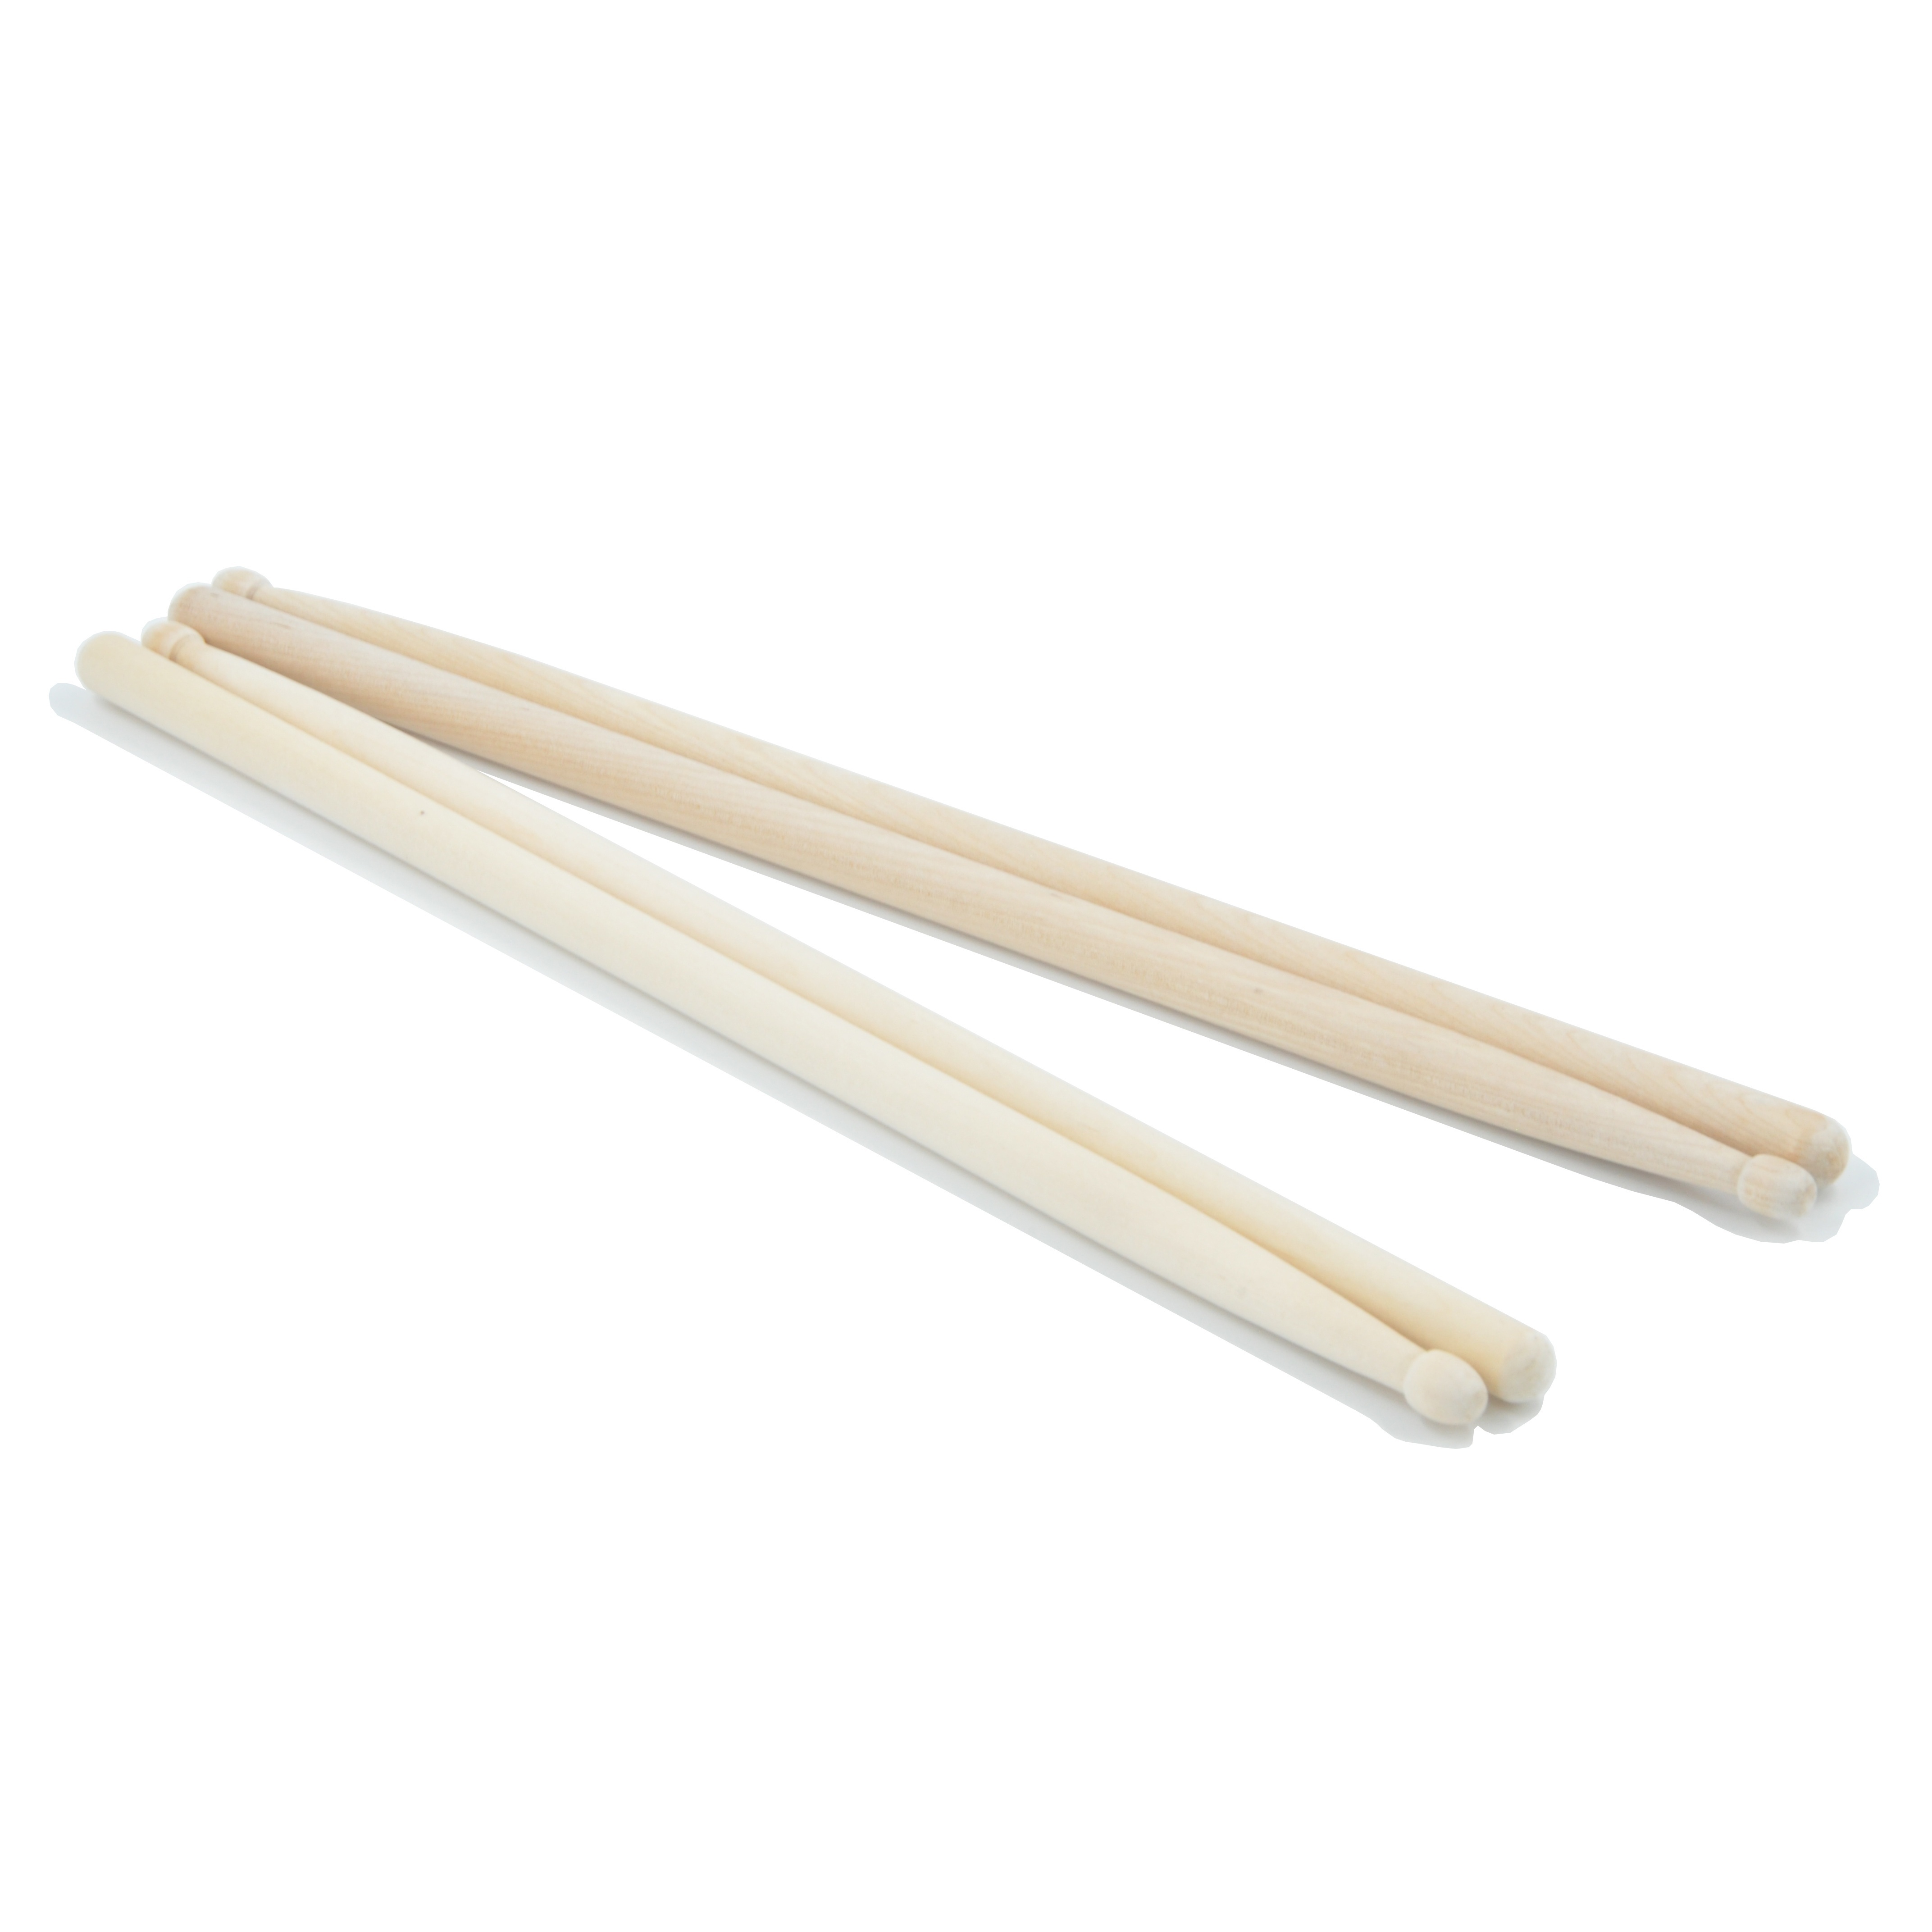 

1 Pair 5a/7a Maple Drumsticks Drum Stick Natural Wood Color For Adults And Beginners